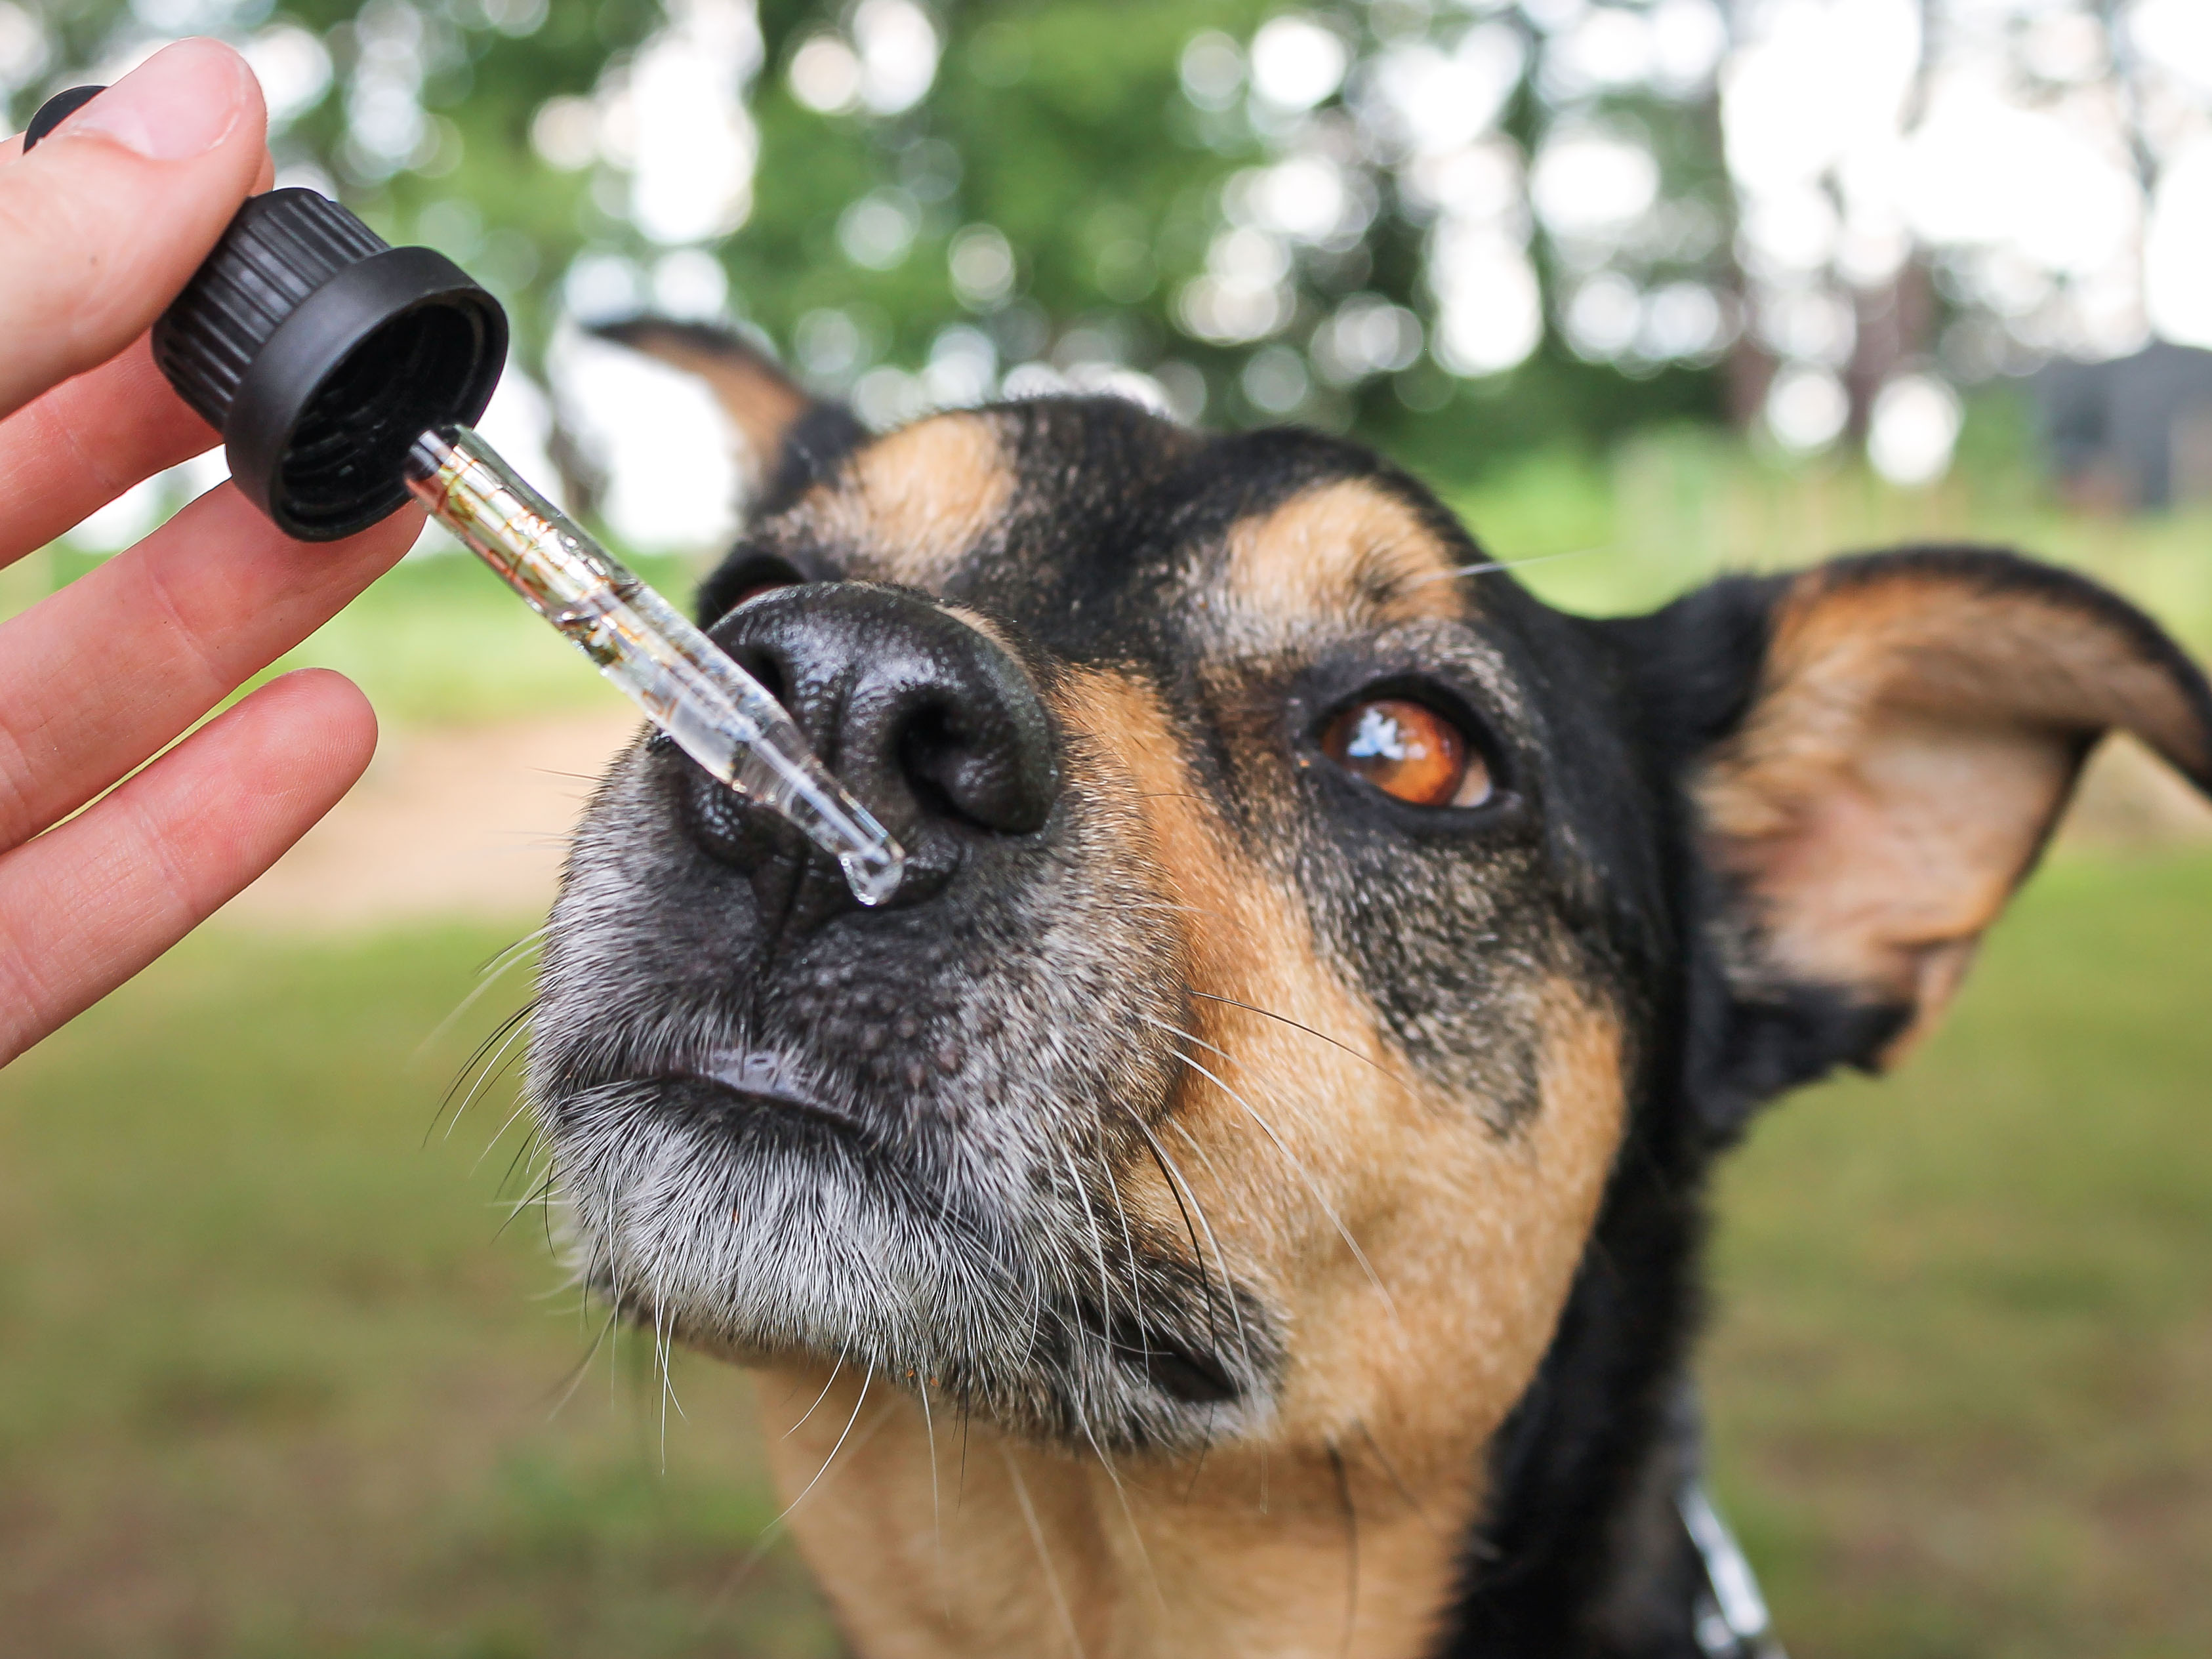 Dog curiously sniffing a tincture dropper full of cbd oil for dogs